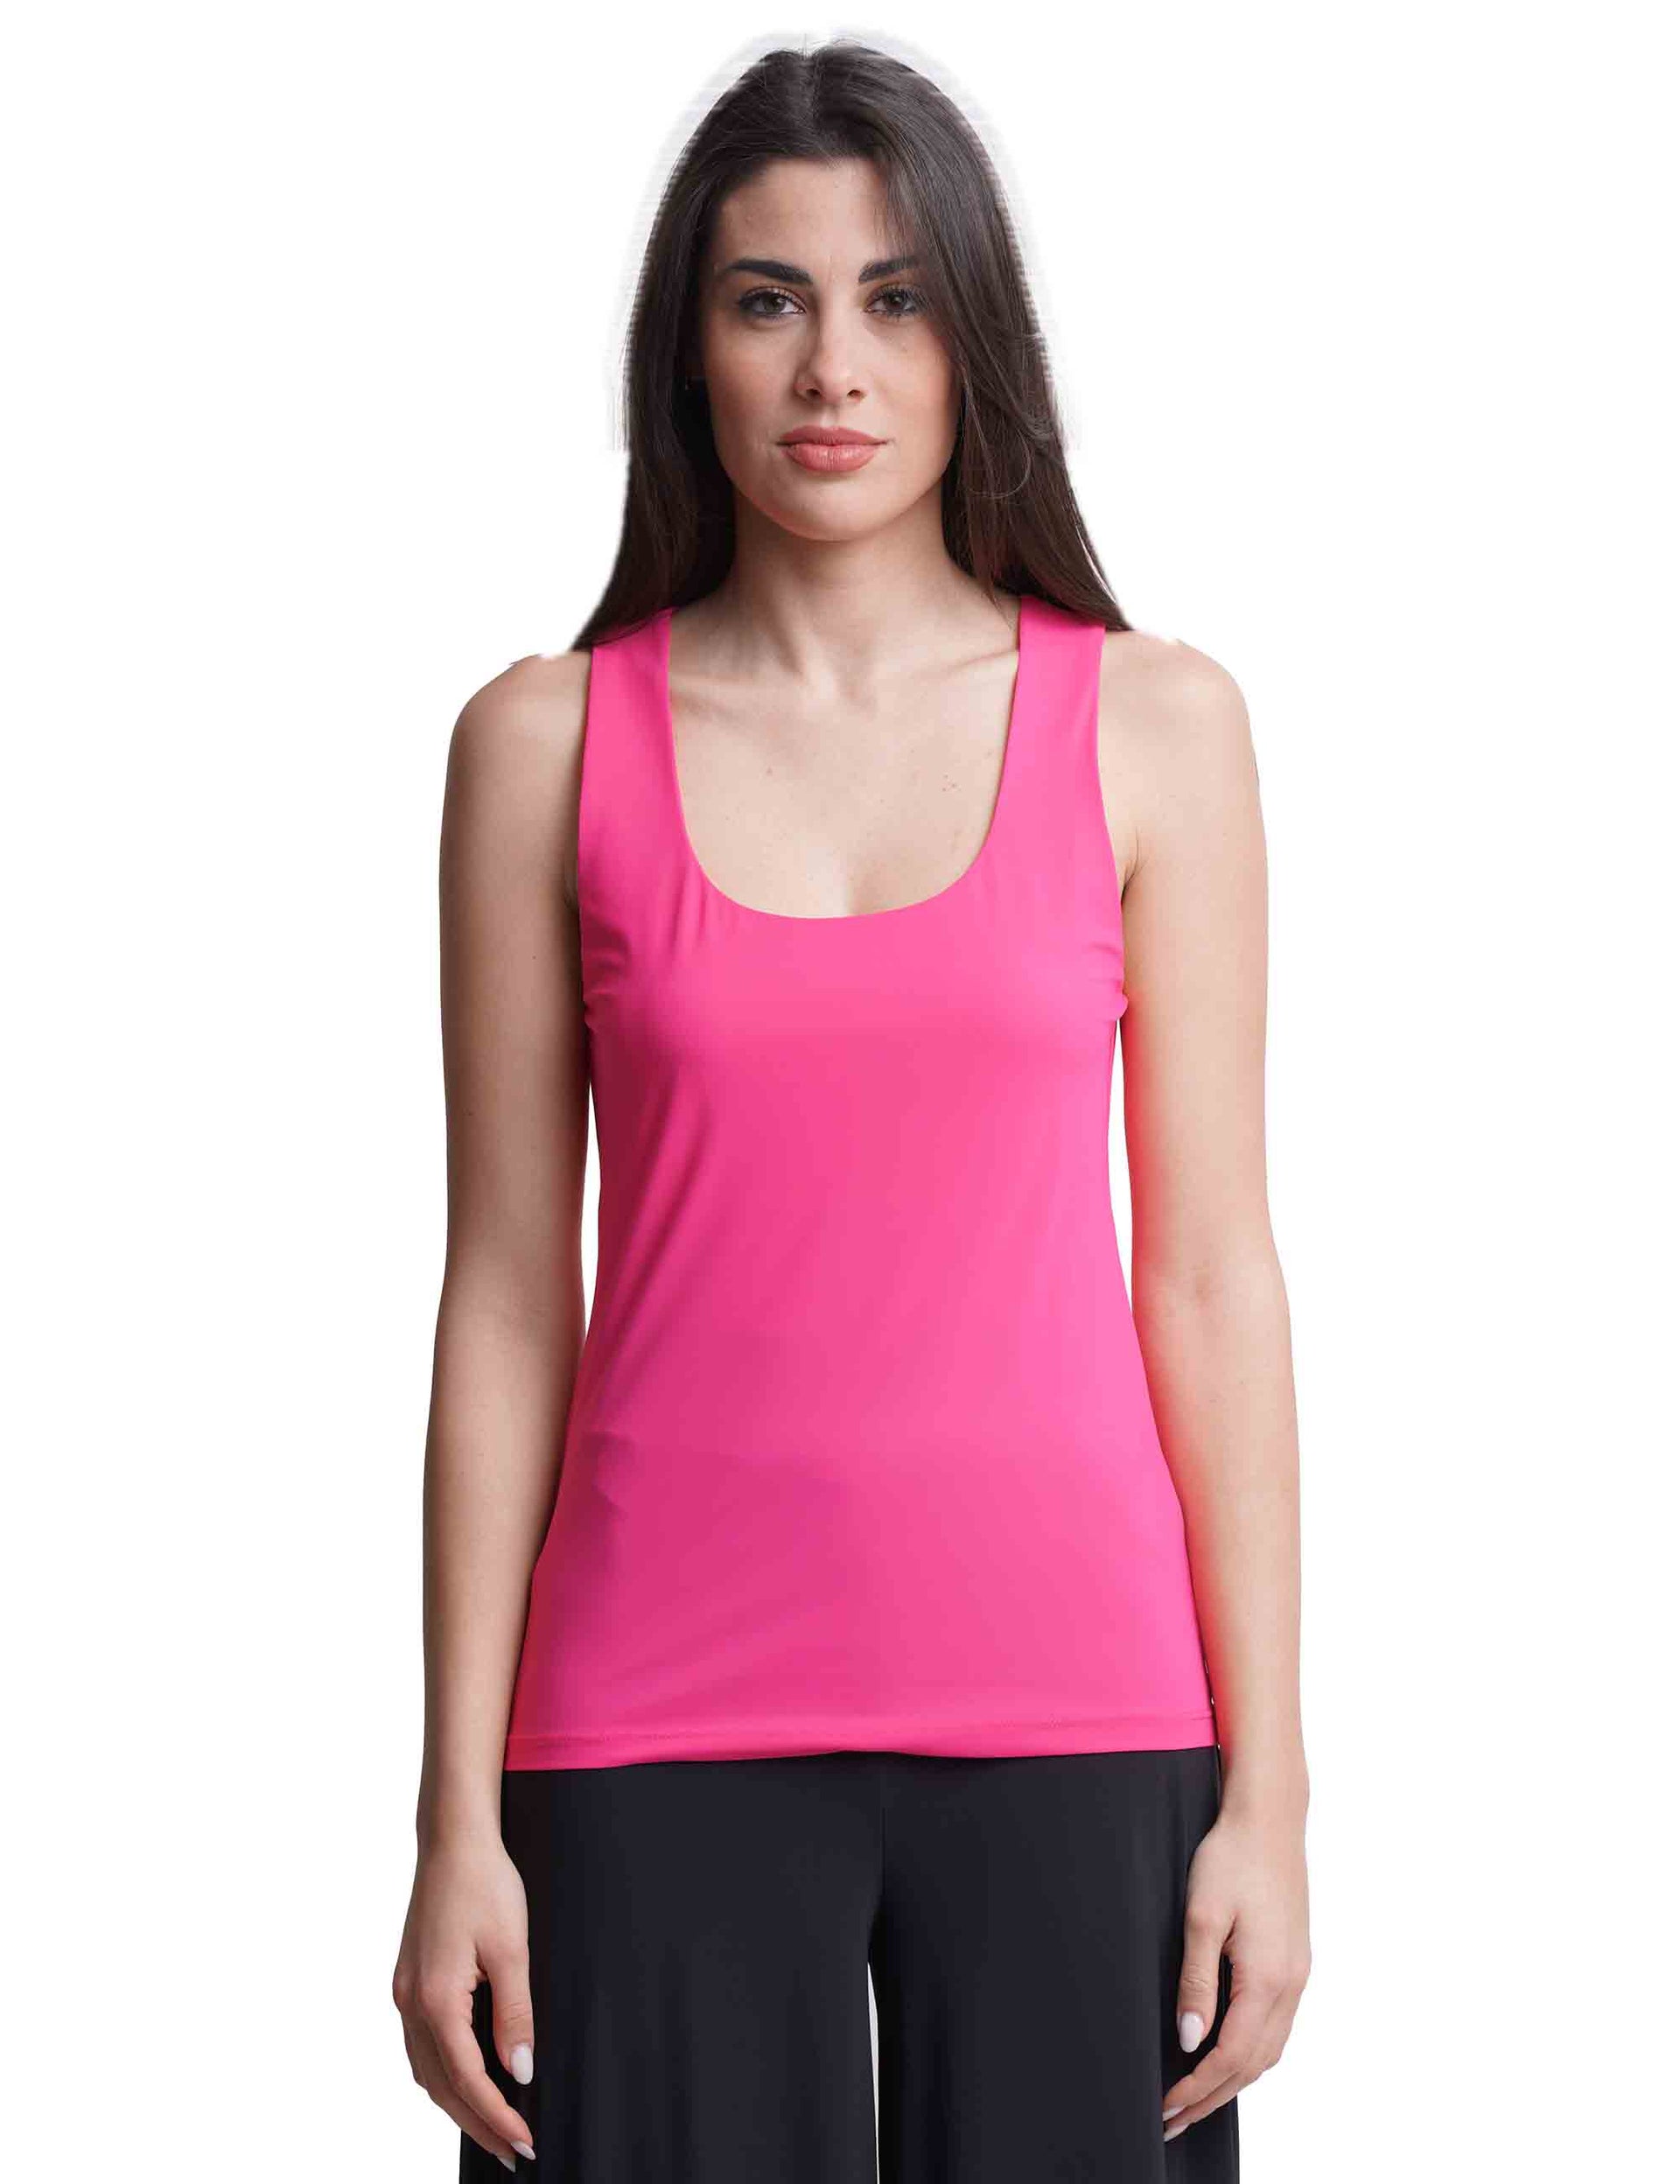 Soft women's top in pink jersey